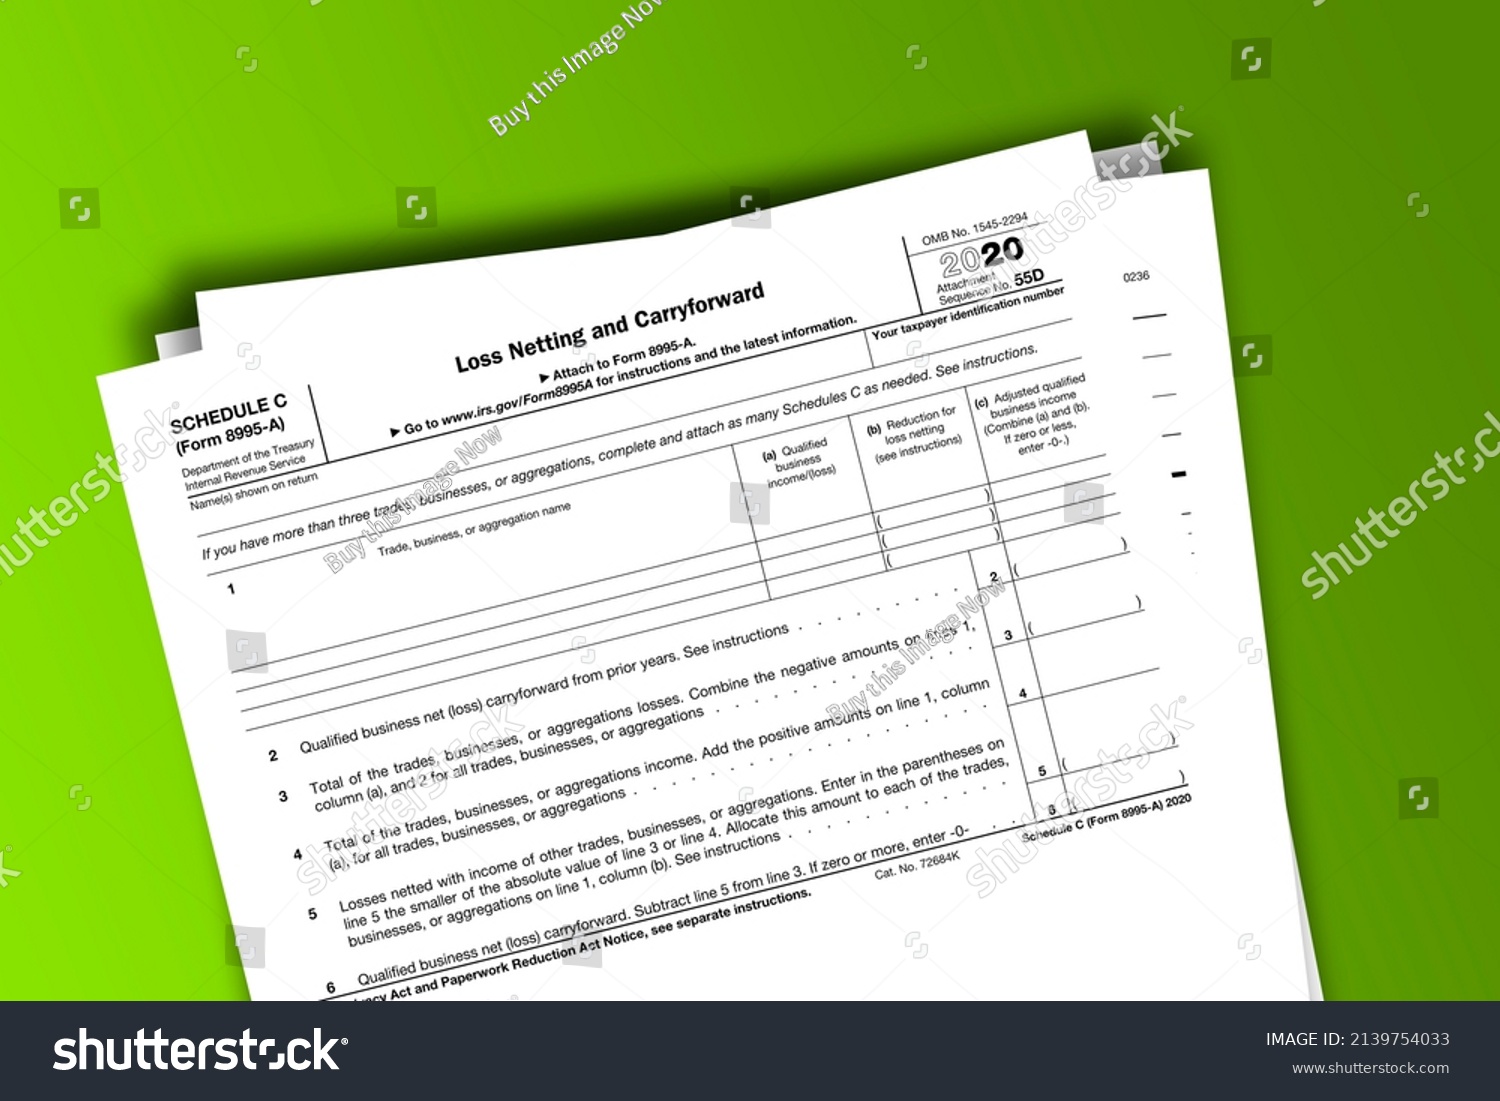 form-8995a-schedule-c-papers-schedule-stock-illustration-2139754033